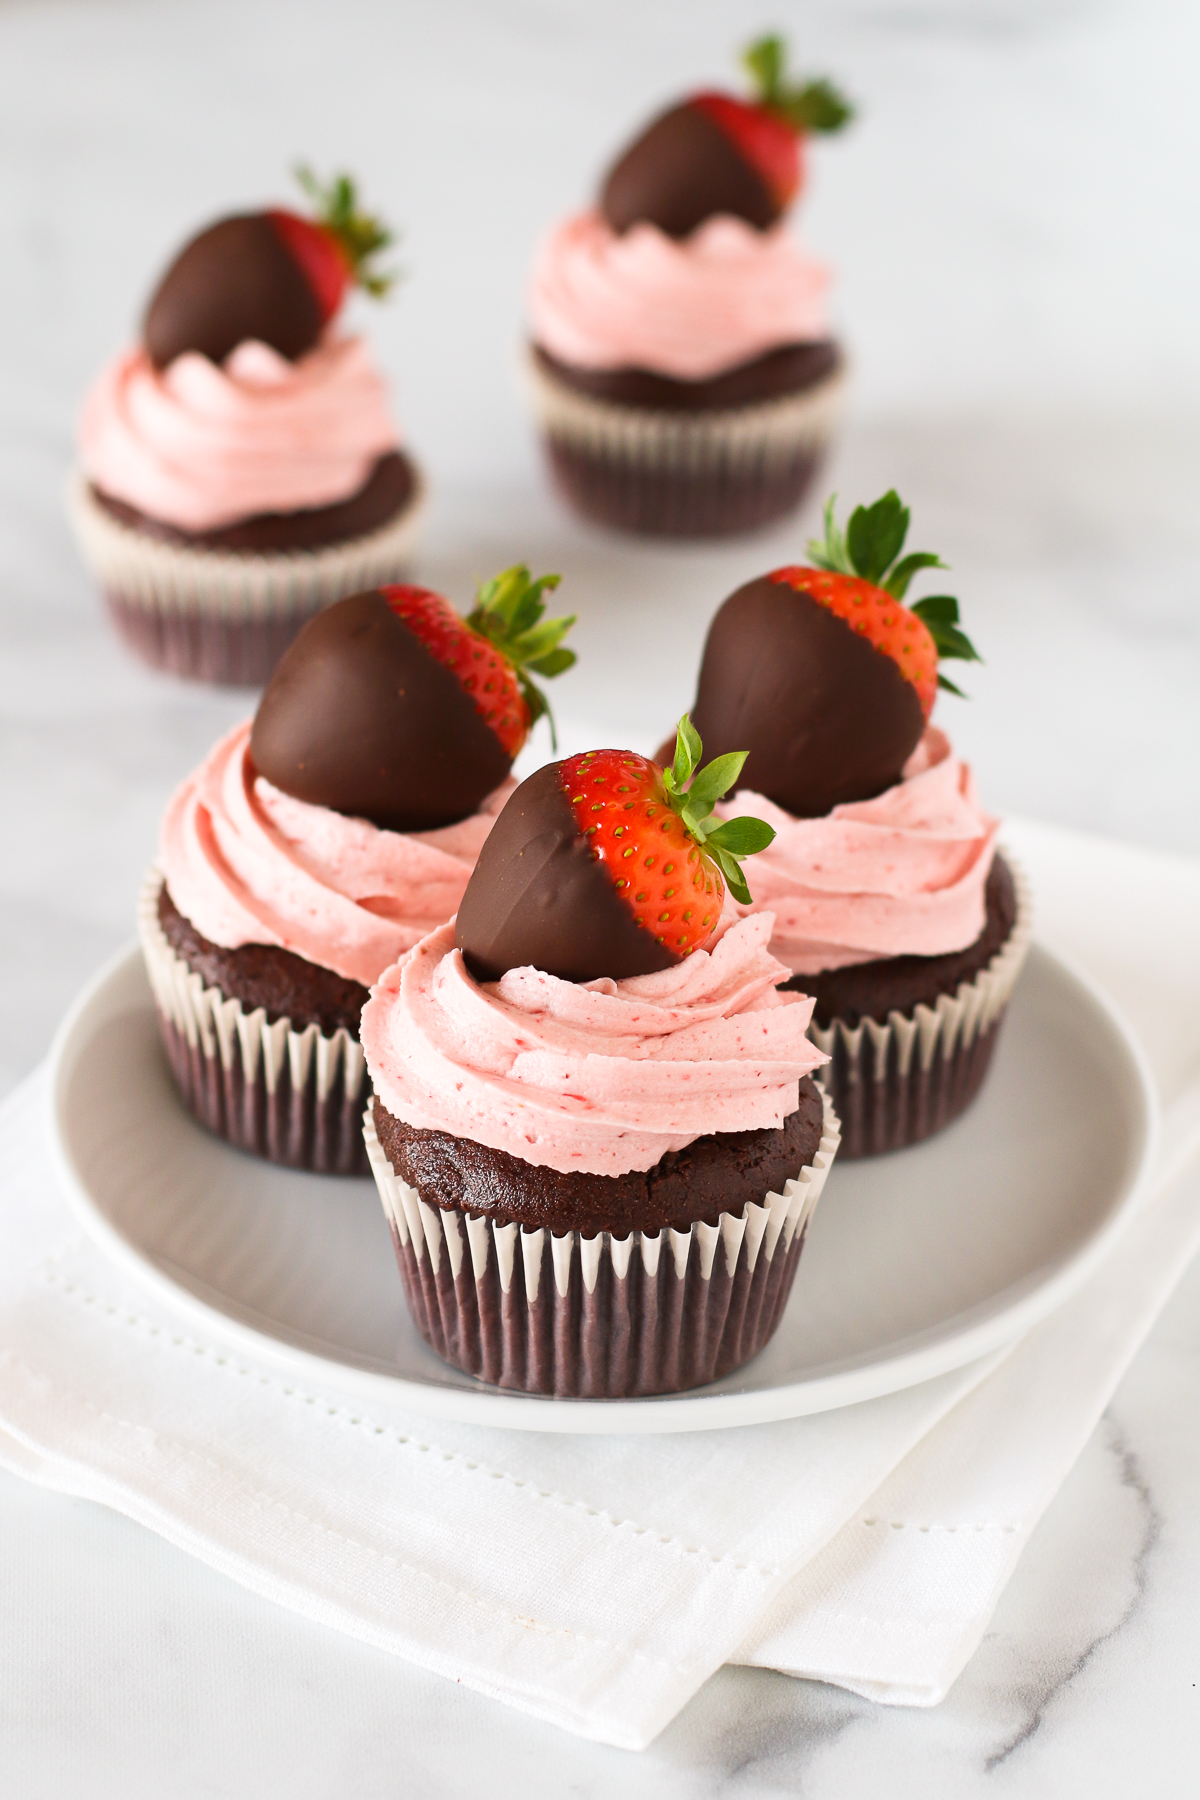 Gluten Free Vegan Chocolate Covered Strawberry Cupcakes. Chocolate cupcakes with a fluffy strawberry buttercream, topped with a beautiful chocolate covered strawberry.